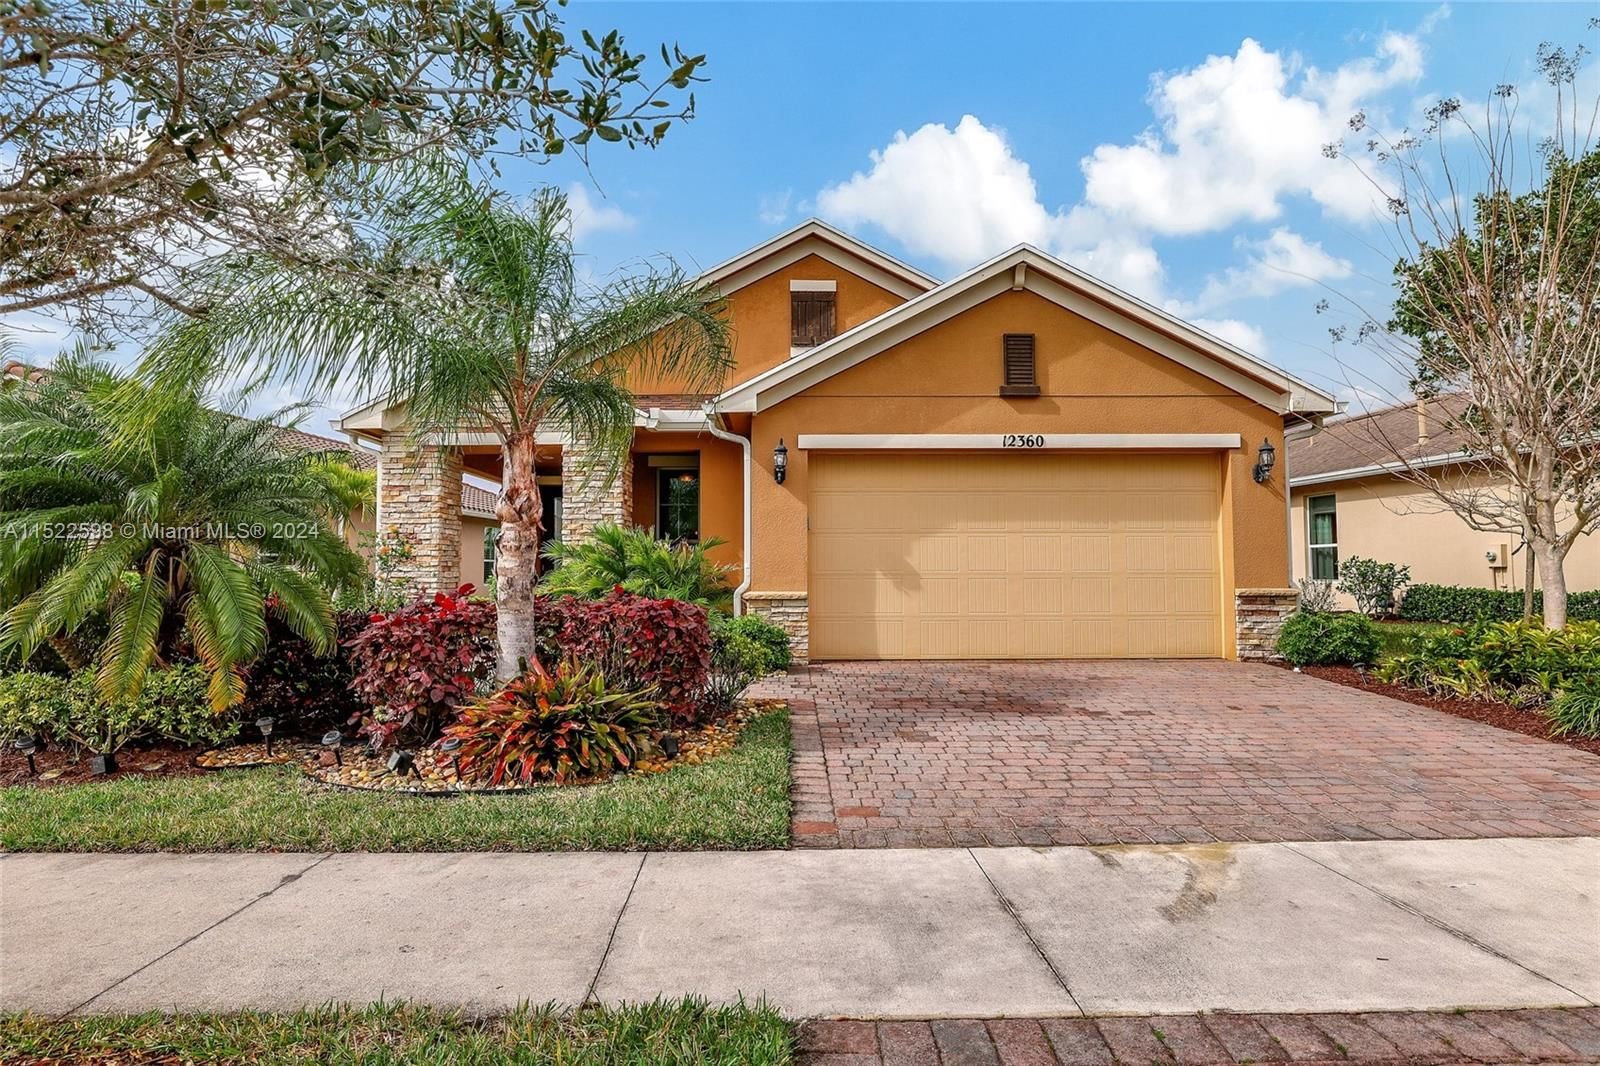 Real estate property located at 12360 Weeping Willow Ave, St Lucie County, Vitalia at Tradition, Port St. Lucie, FL